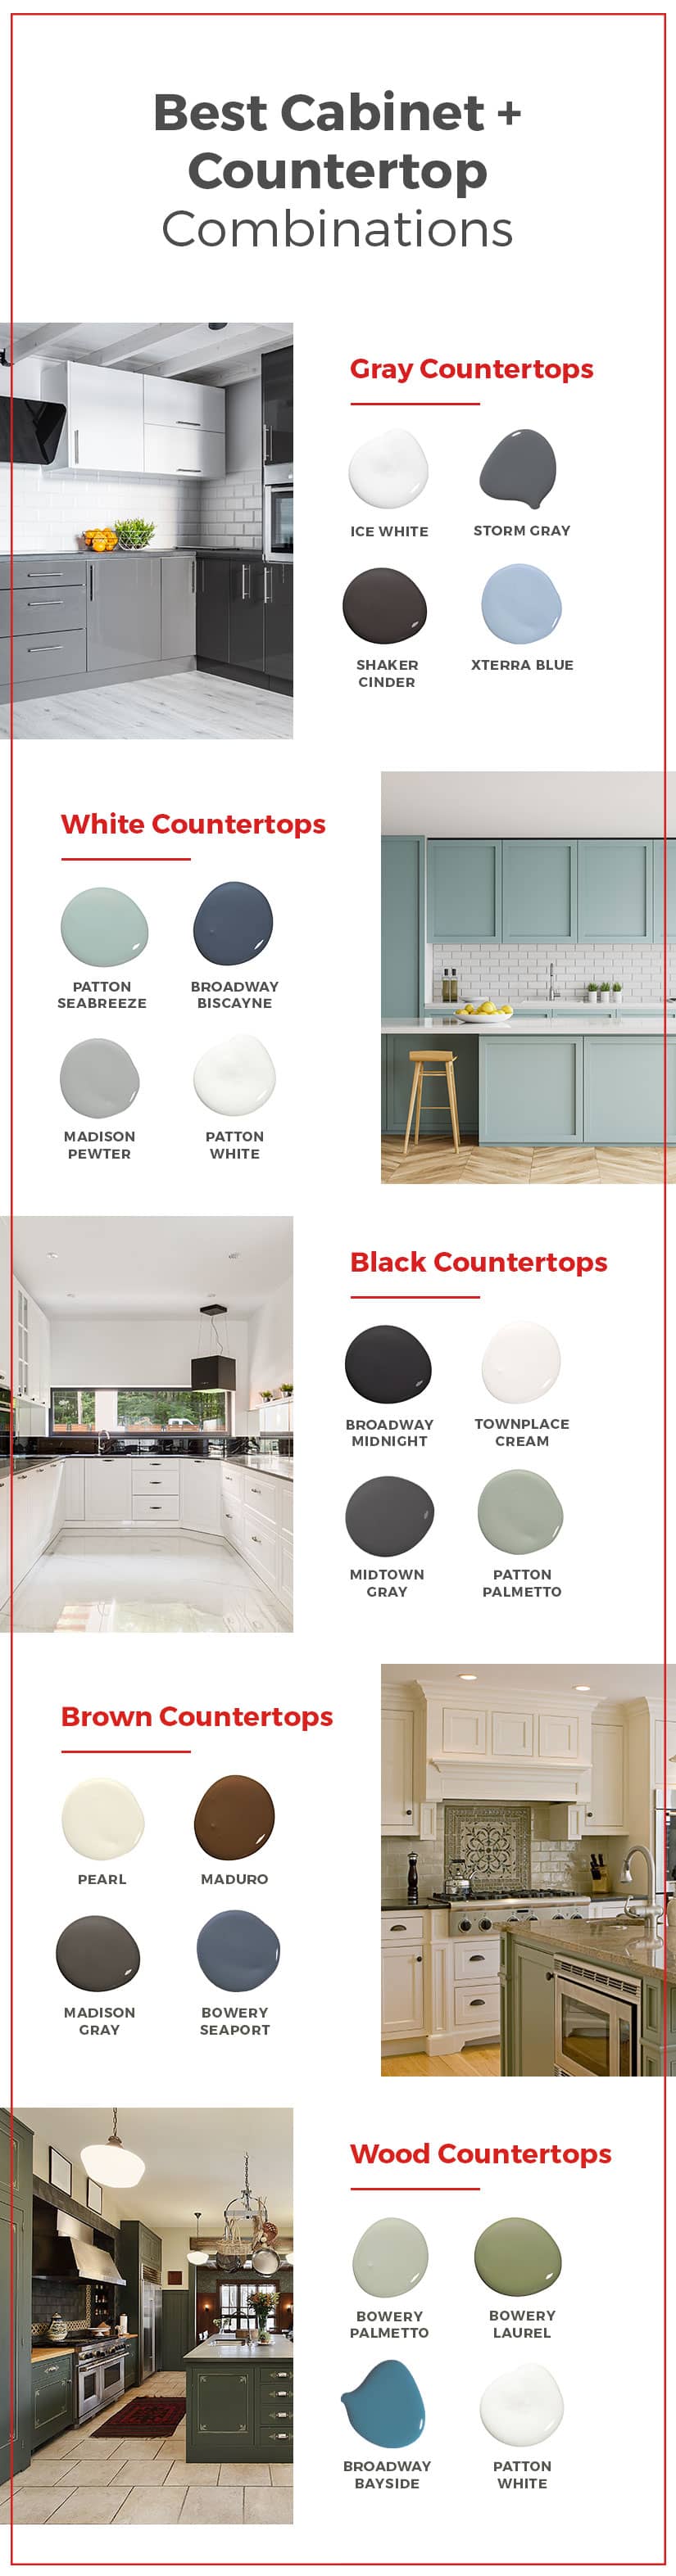 The best kitchen cabinet color and countertop combinations.